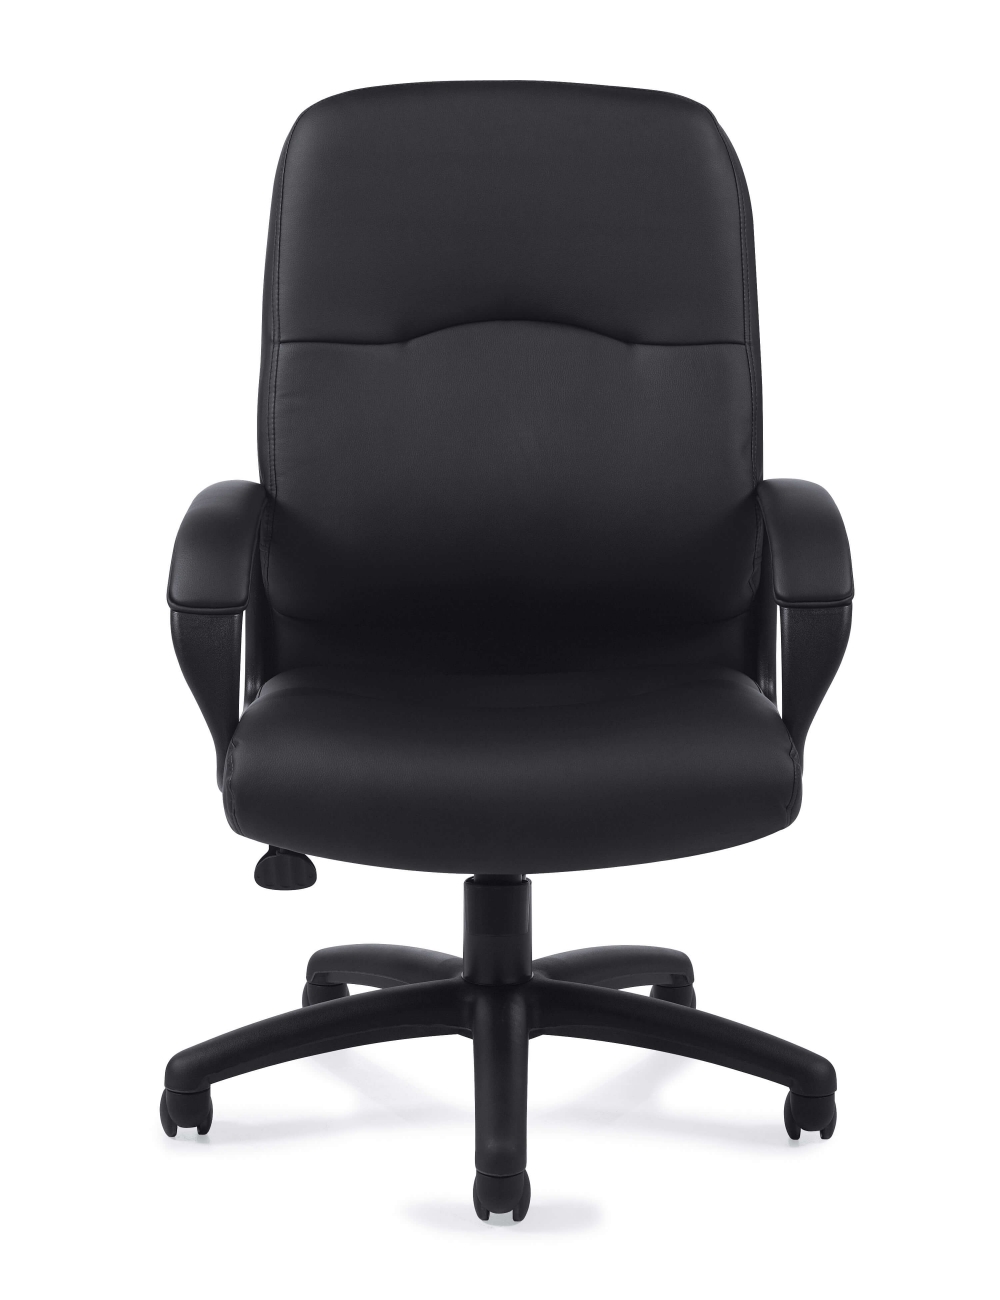 Leather office chair front view